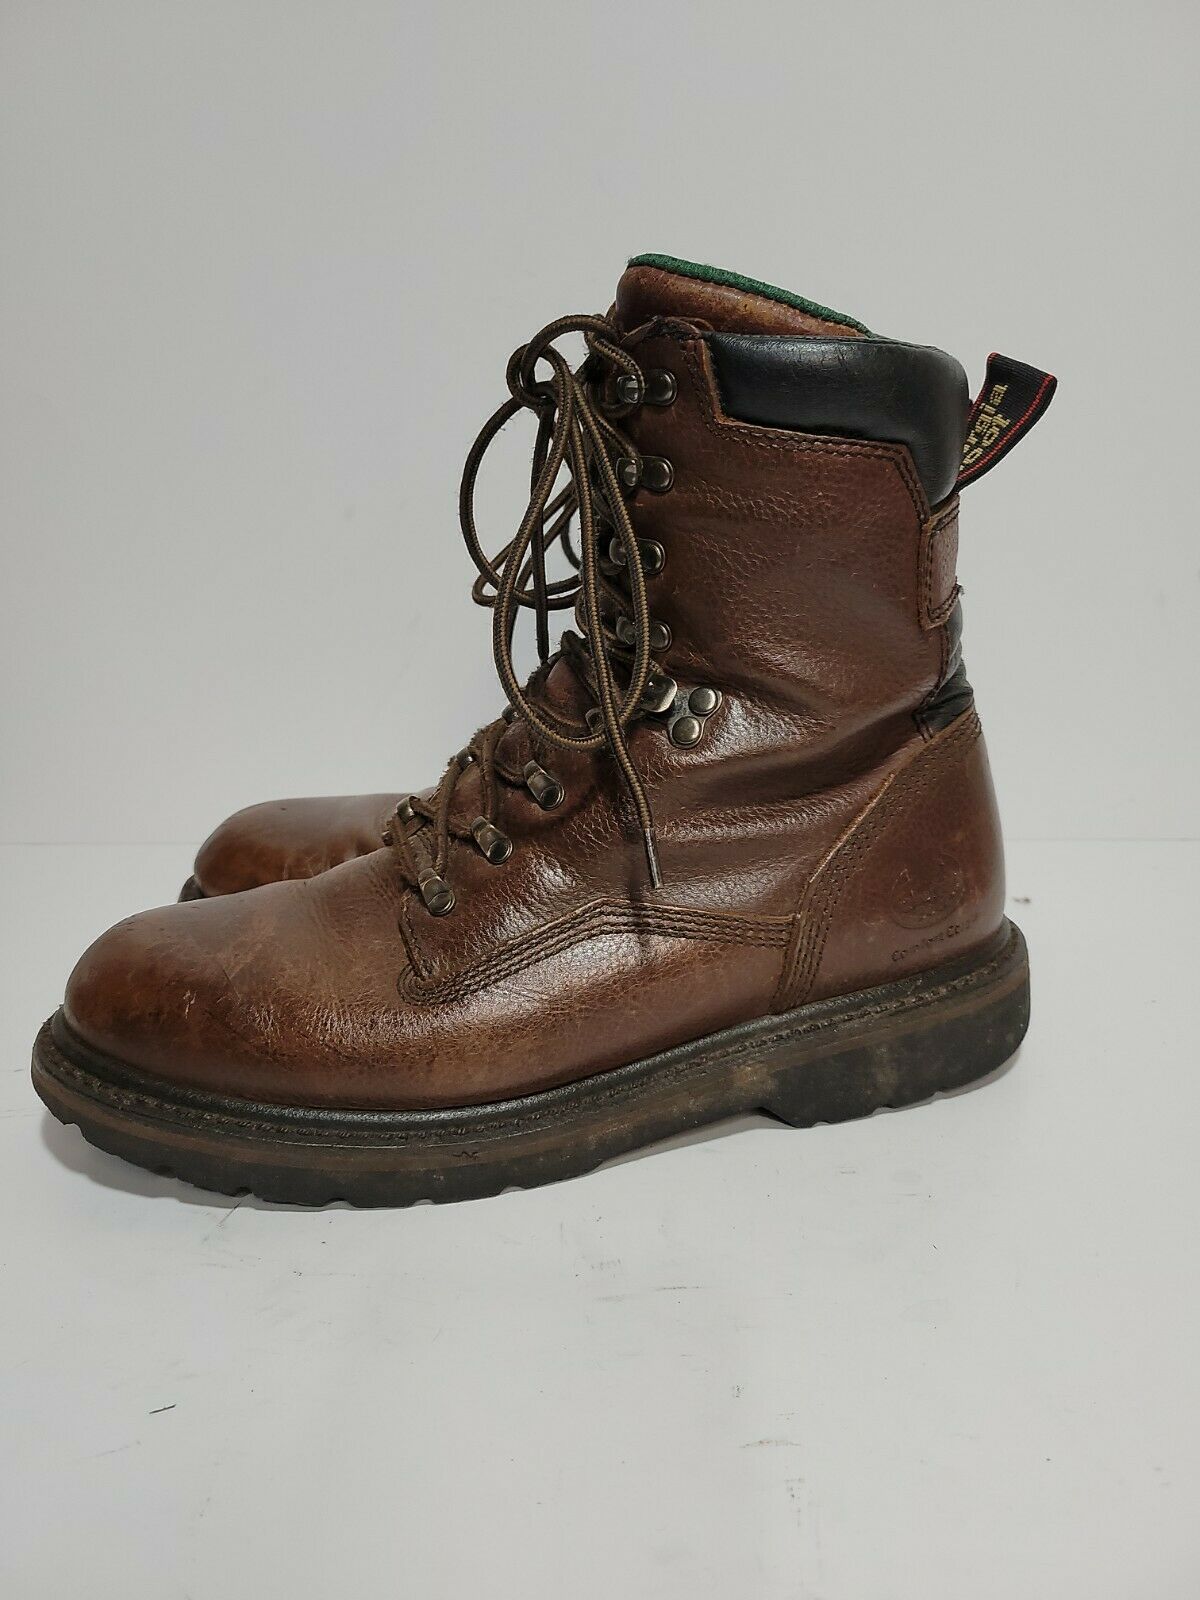 GEORGIA BOOTS COMFORT CORE BROWN LEATHER HIKING WORK MENS 9M BOOTS